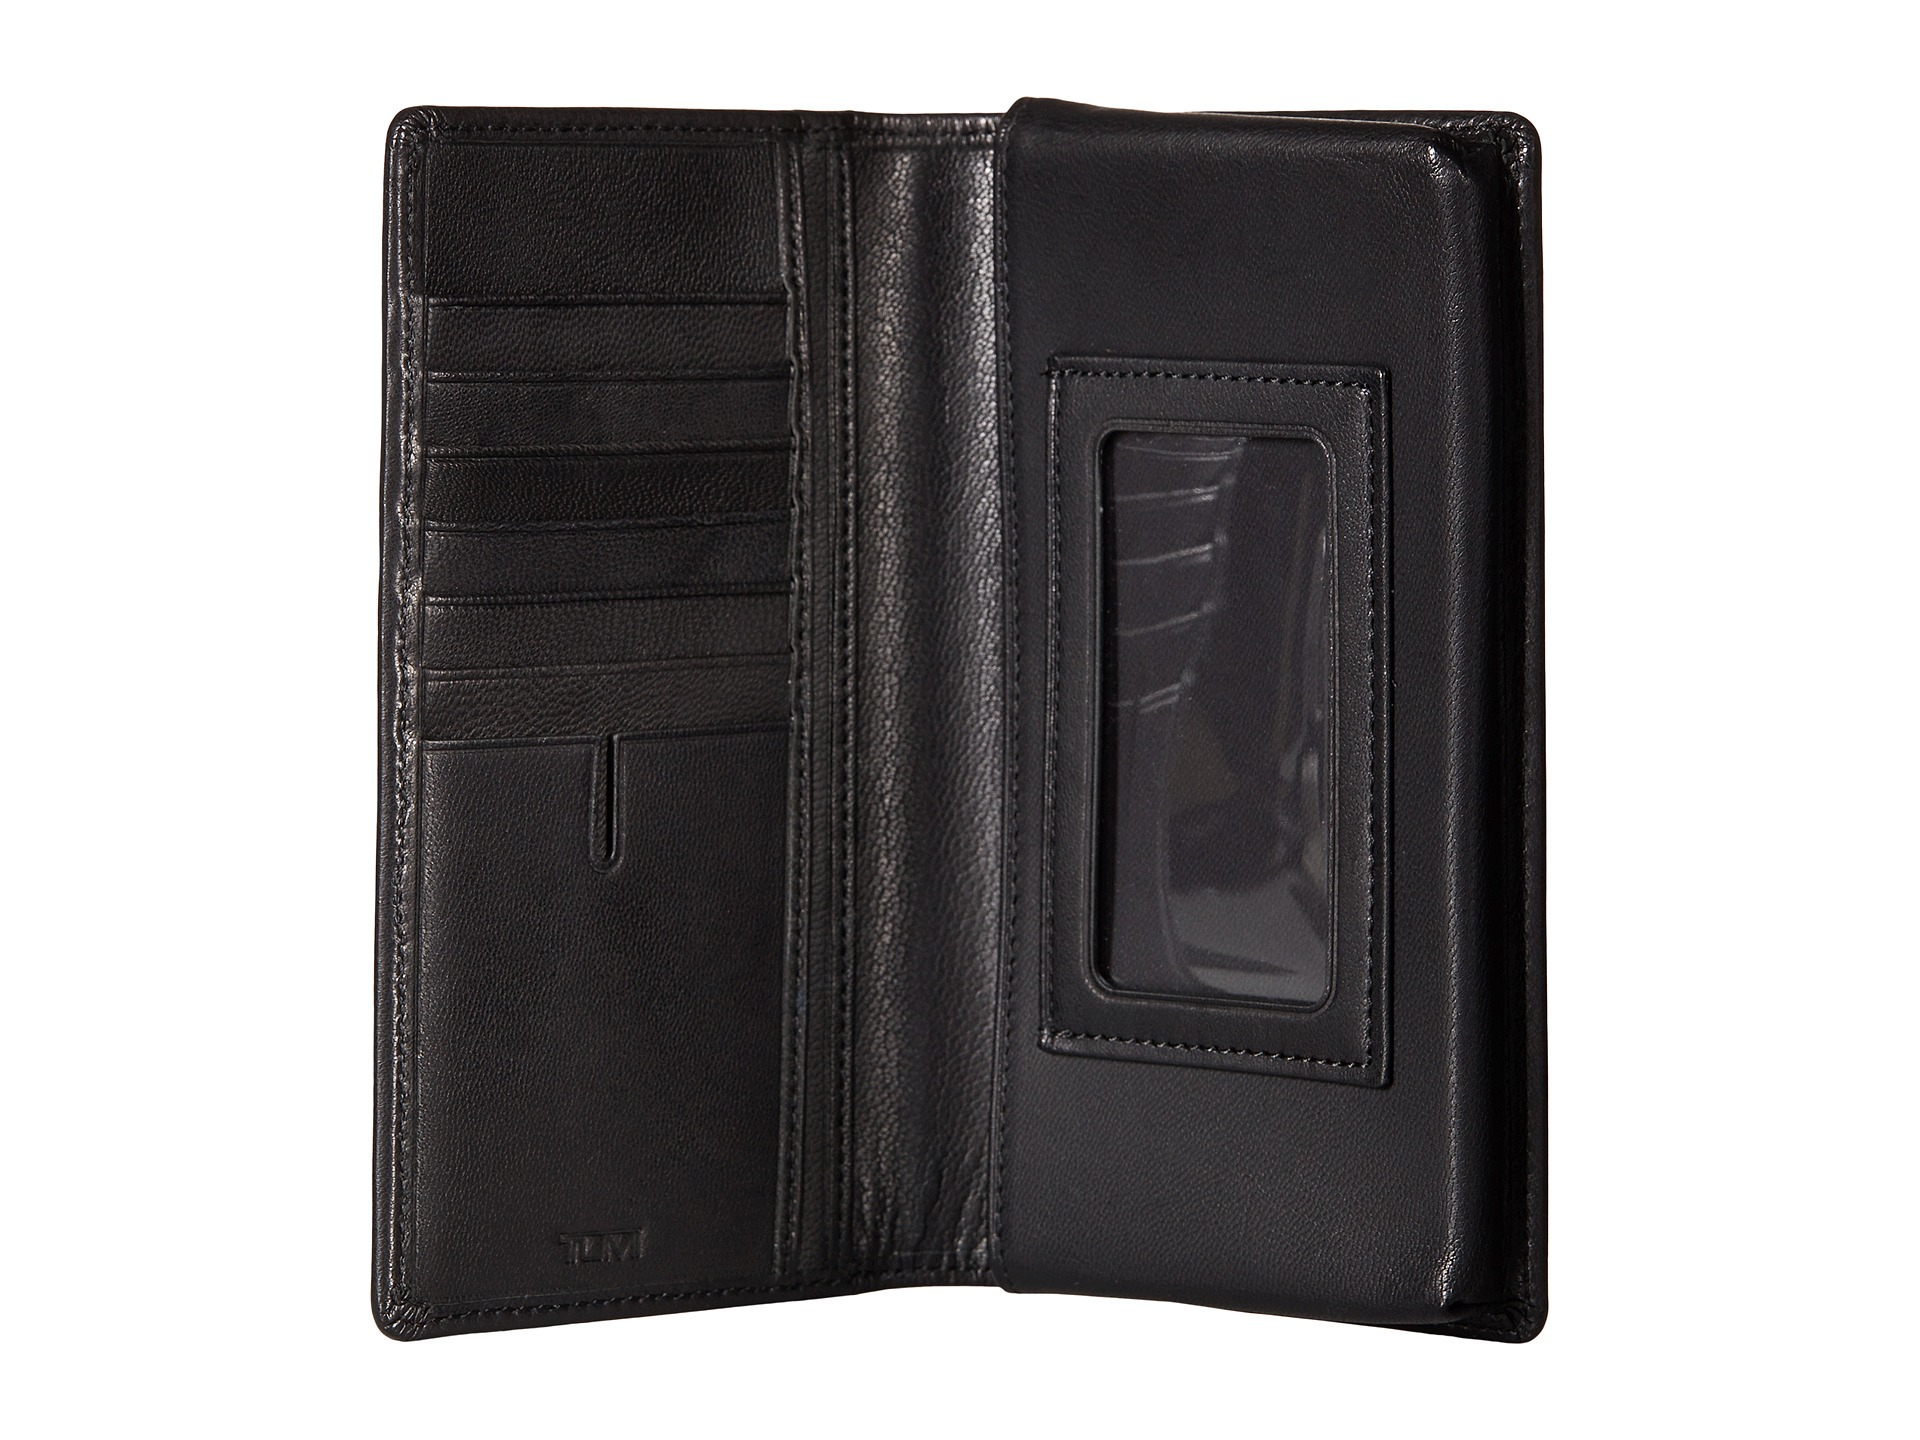 Lyst - Tumi Chambers Large Tech Wallet in Black for Men